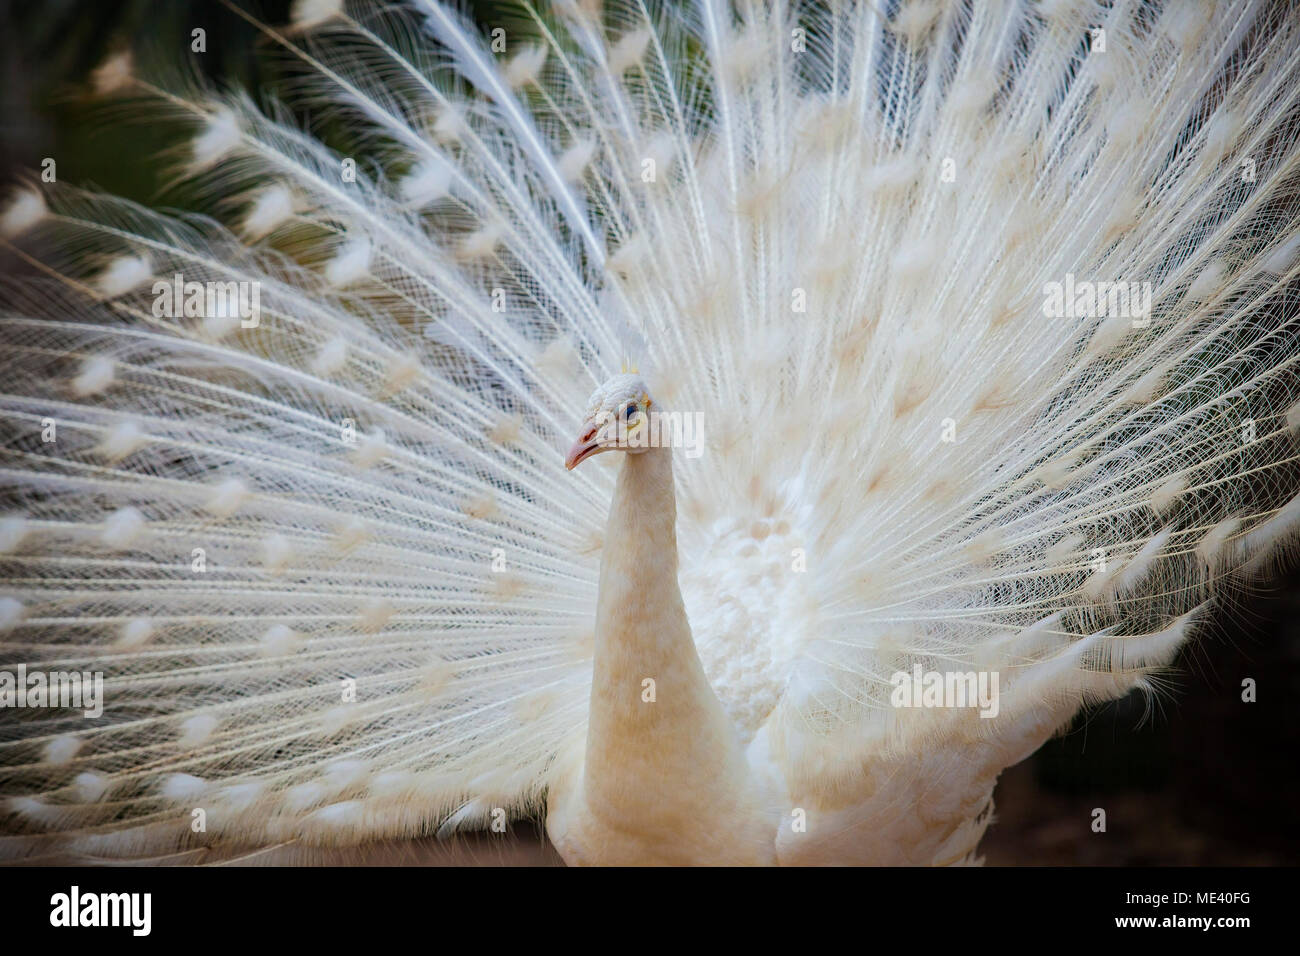 White Male Indian Peacock With Beautiful Fan Tail Plumage Feather Showing For Breeding To Female Stock Photo Alamy